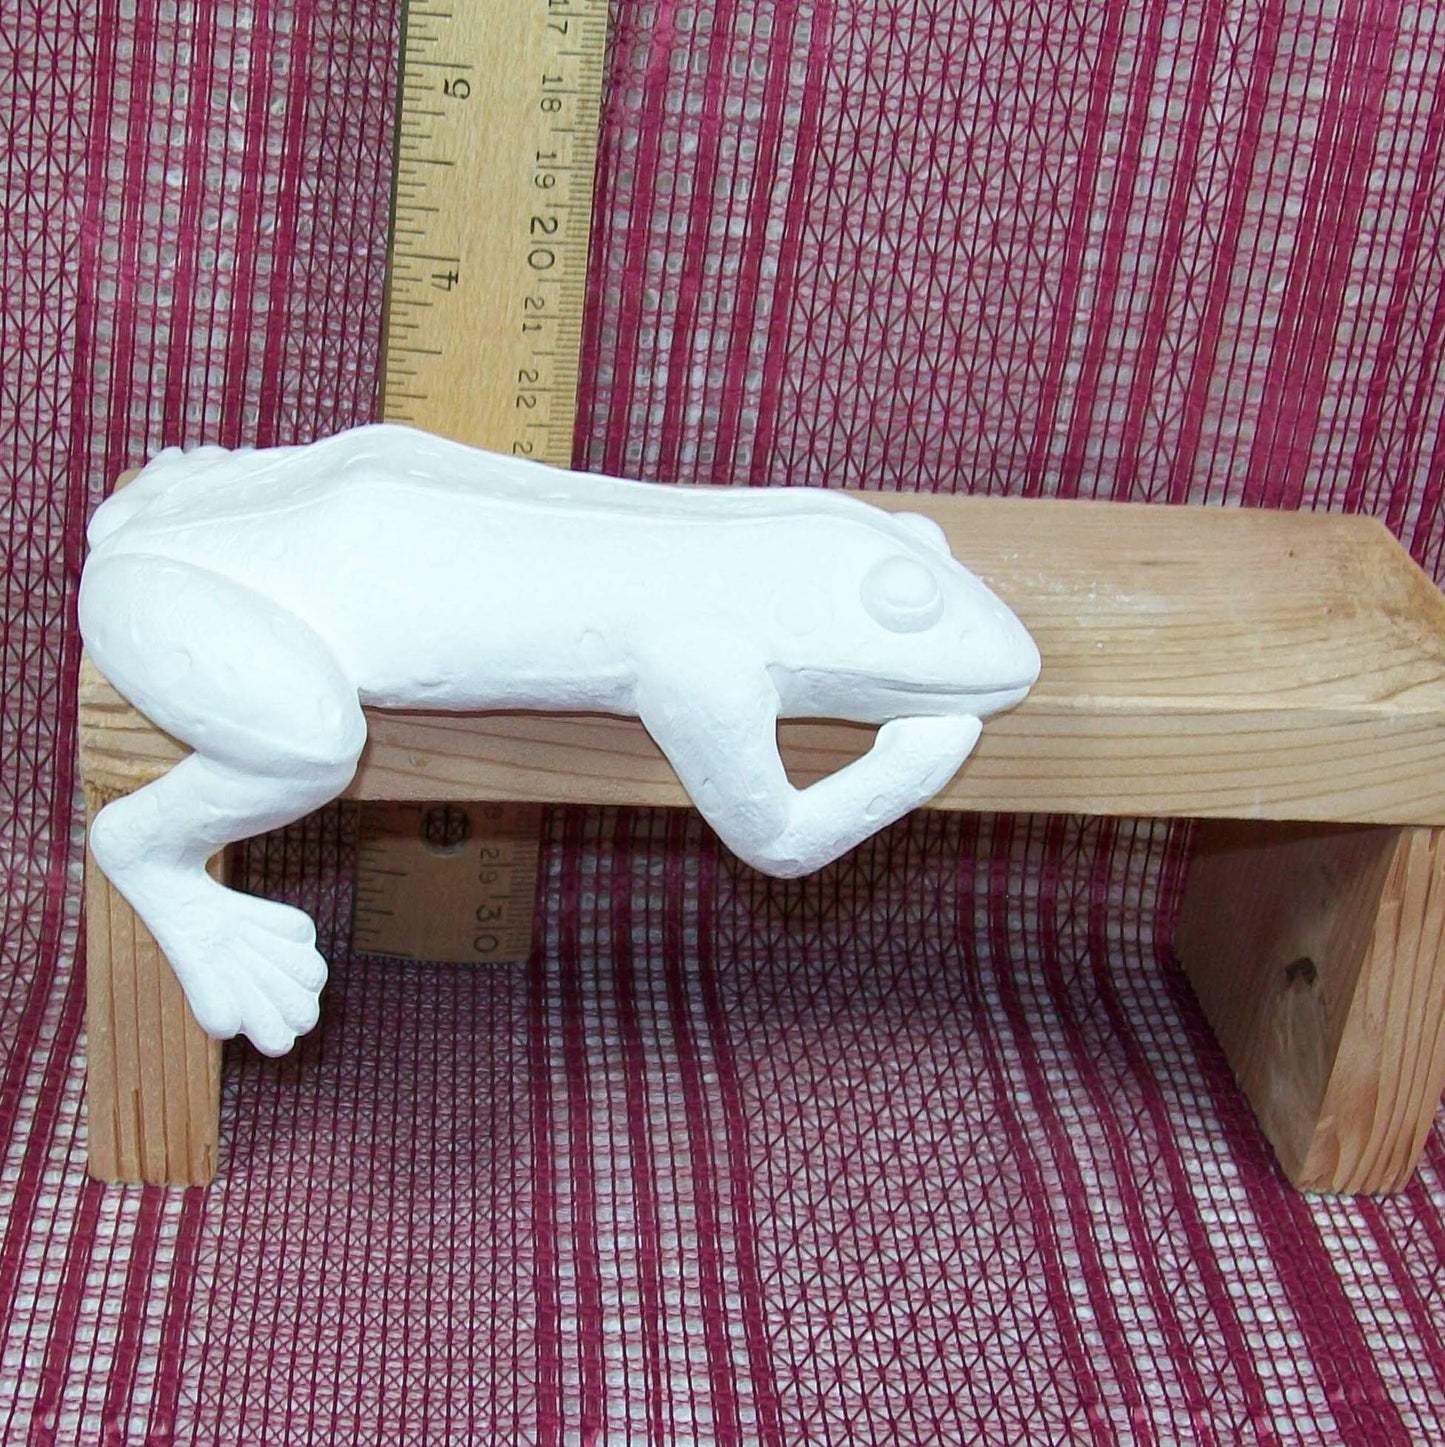 Unpainted Bisque Frog Figurine / Frog Statue / Bisqueware / Frog Decor / Paintable Ceramics / Ceramics to Paint / Frog Lover Gift